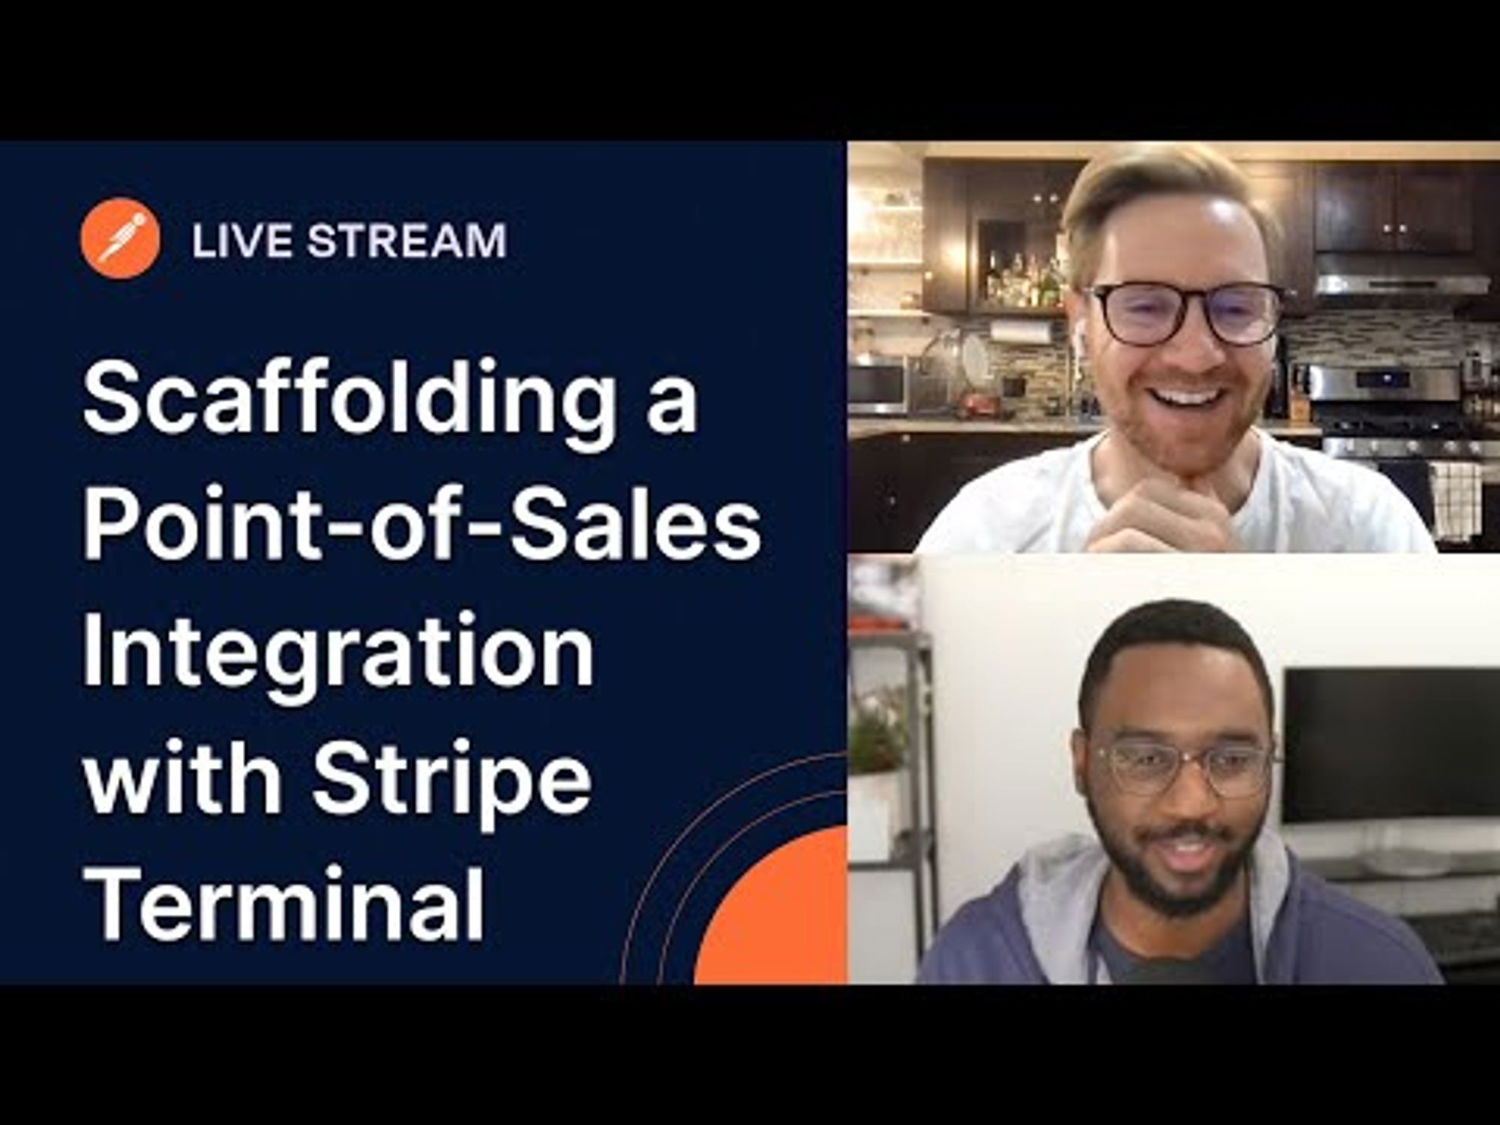 Scaffolding a Point-of-Sales Integration with Stripe Terminal